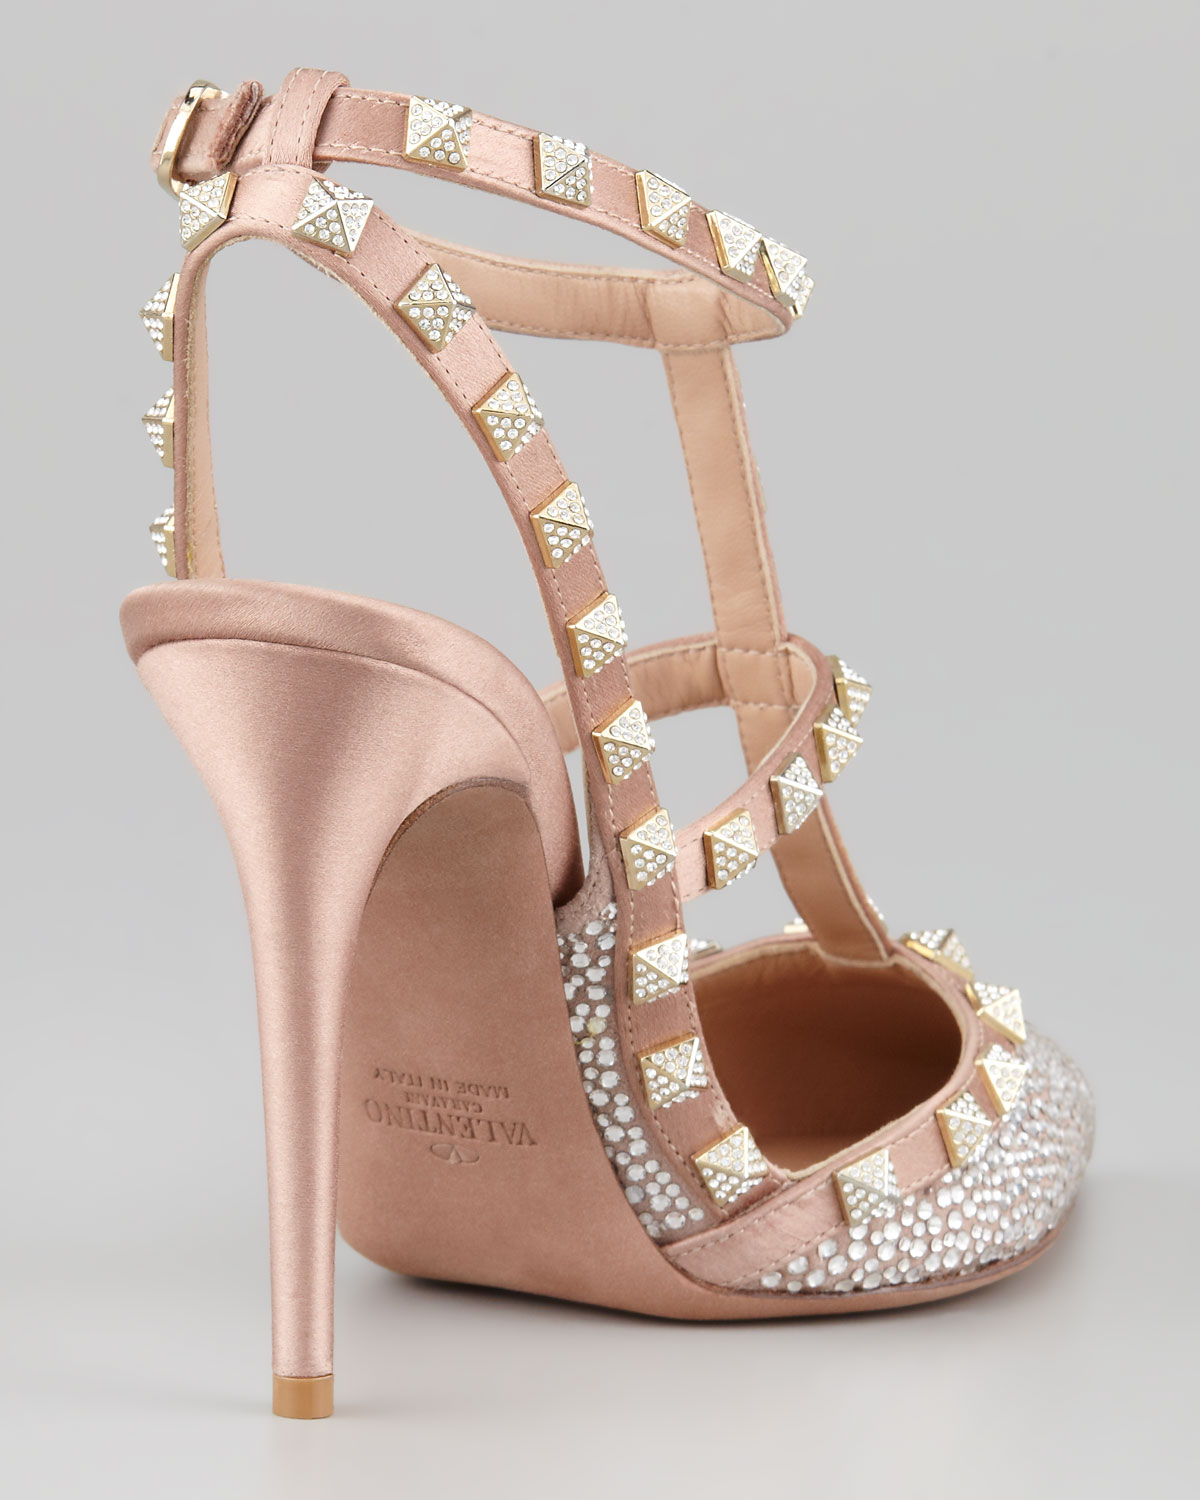 Lyst - Valentino Rockstud Crystallized Tstrap Slingback Poudre in Natural